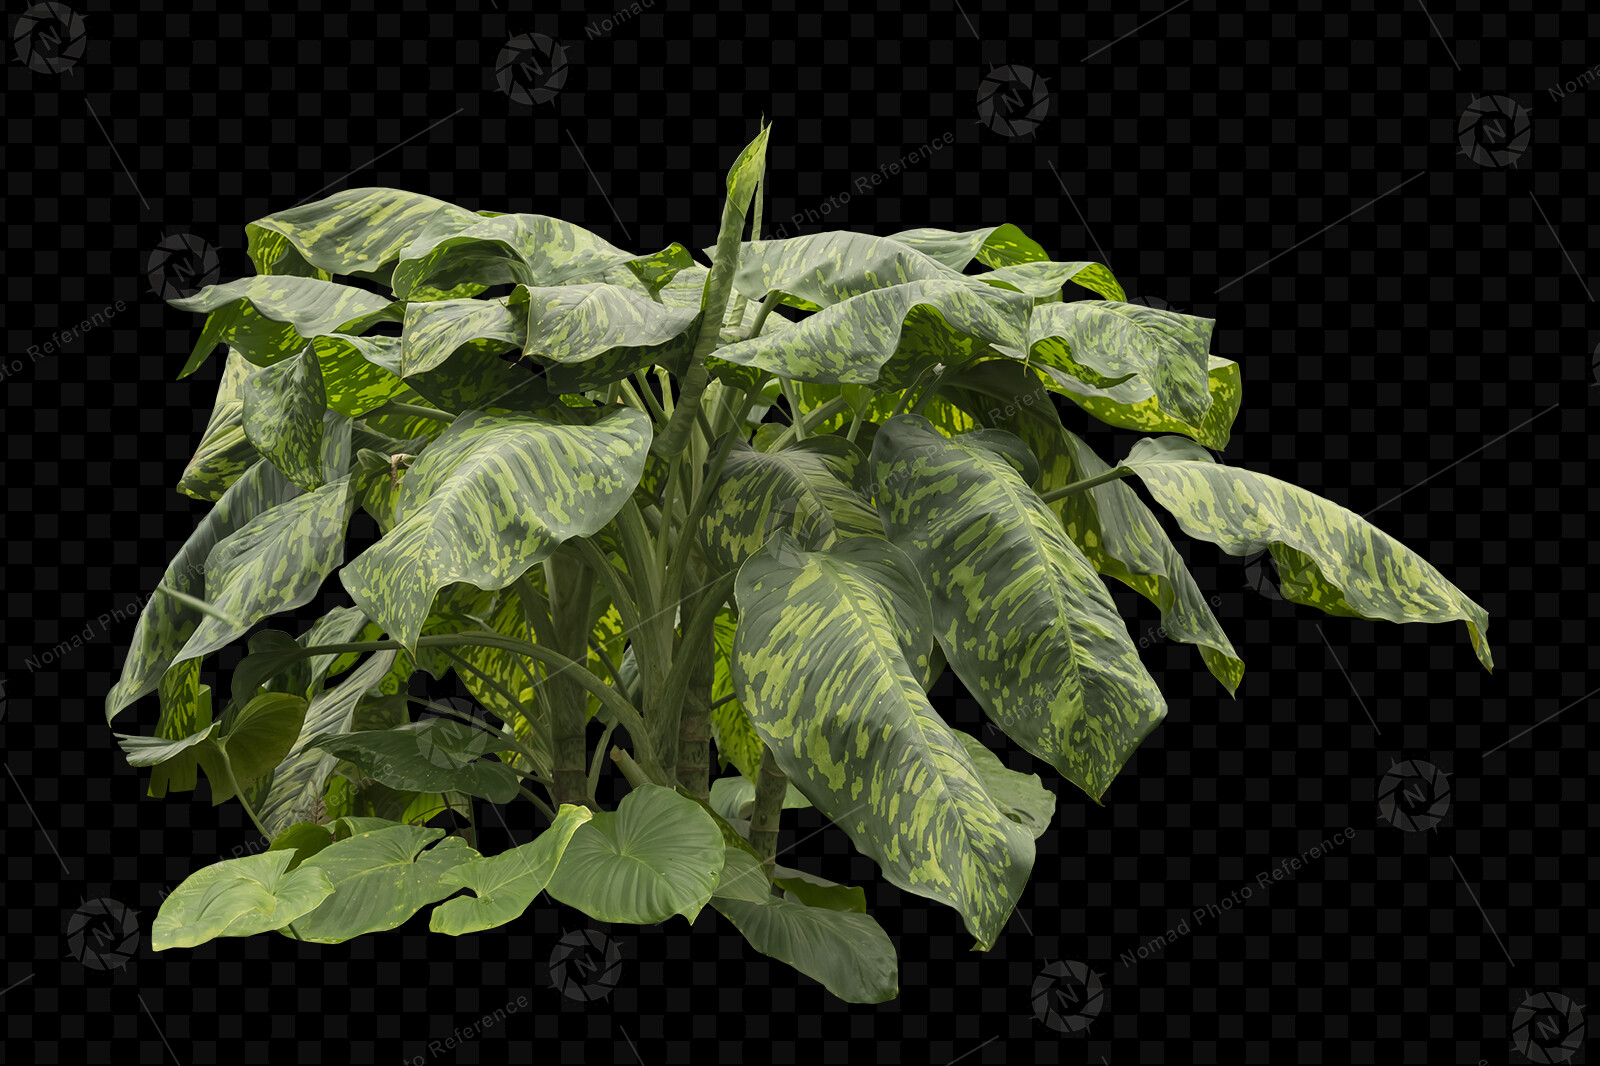 From the PNG Photo Pack: Tropical Foliage 

https://www.artstation.com/a/14810740